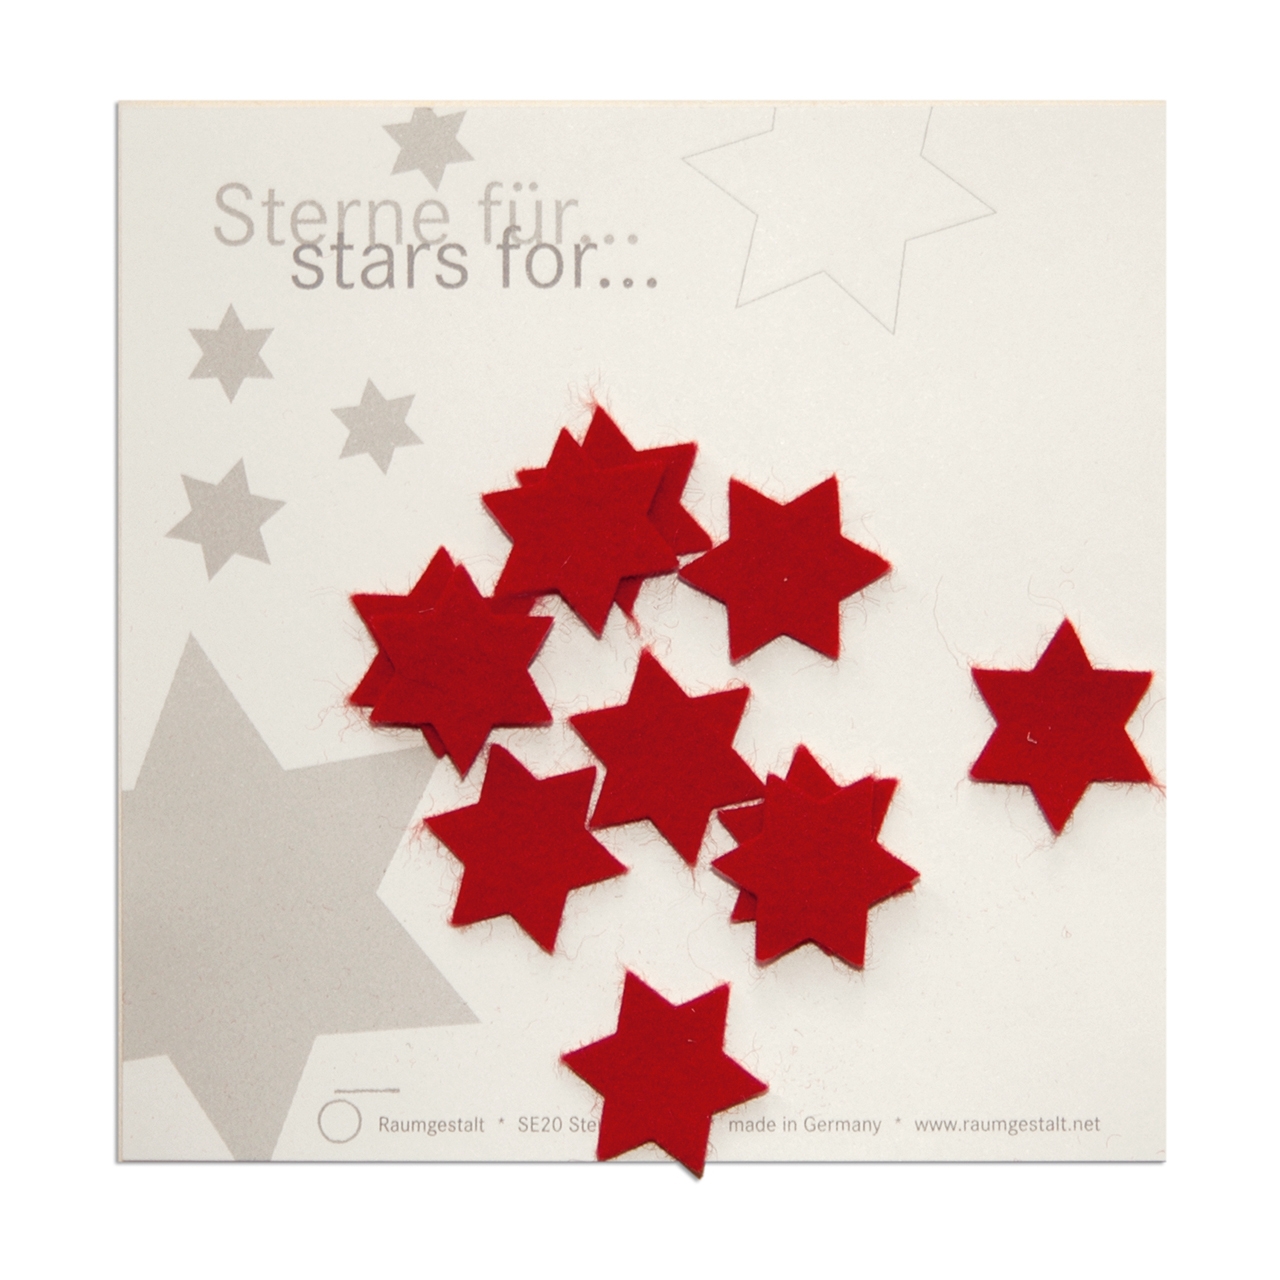 a star for... stars made of red felt